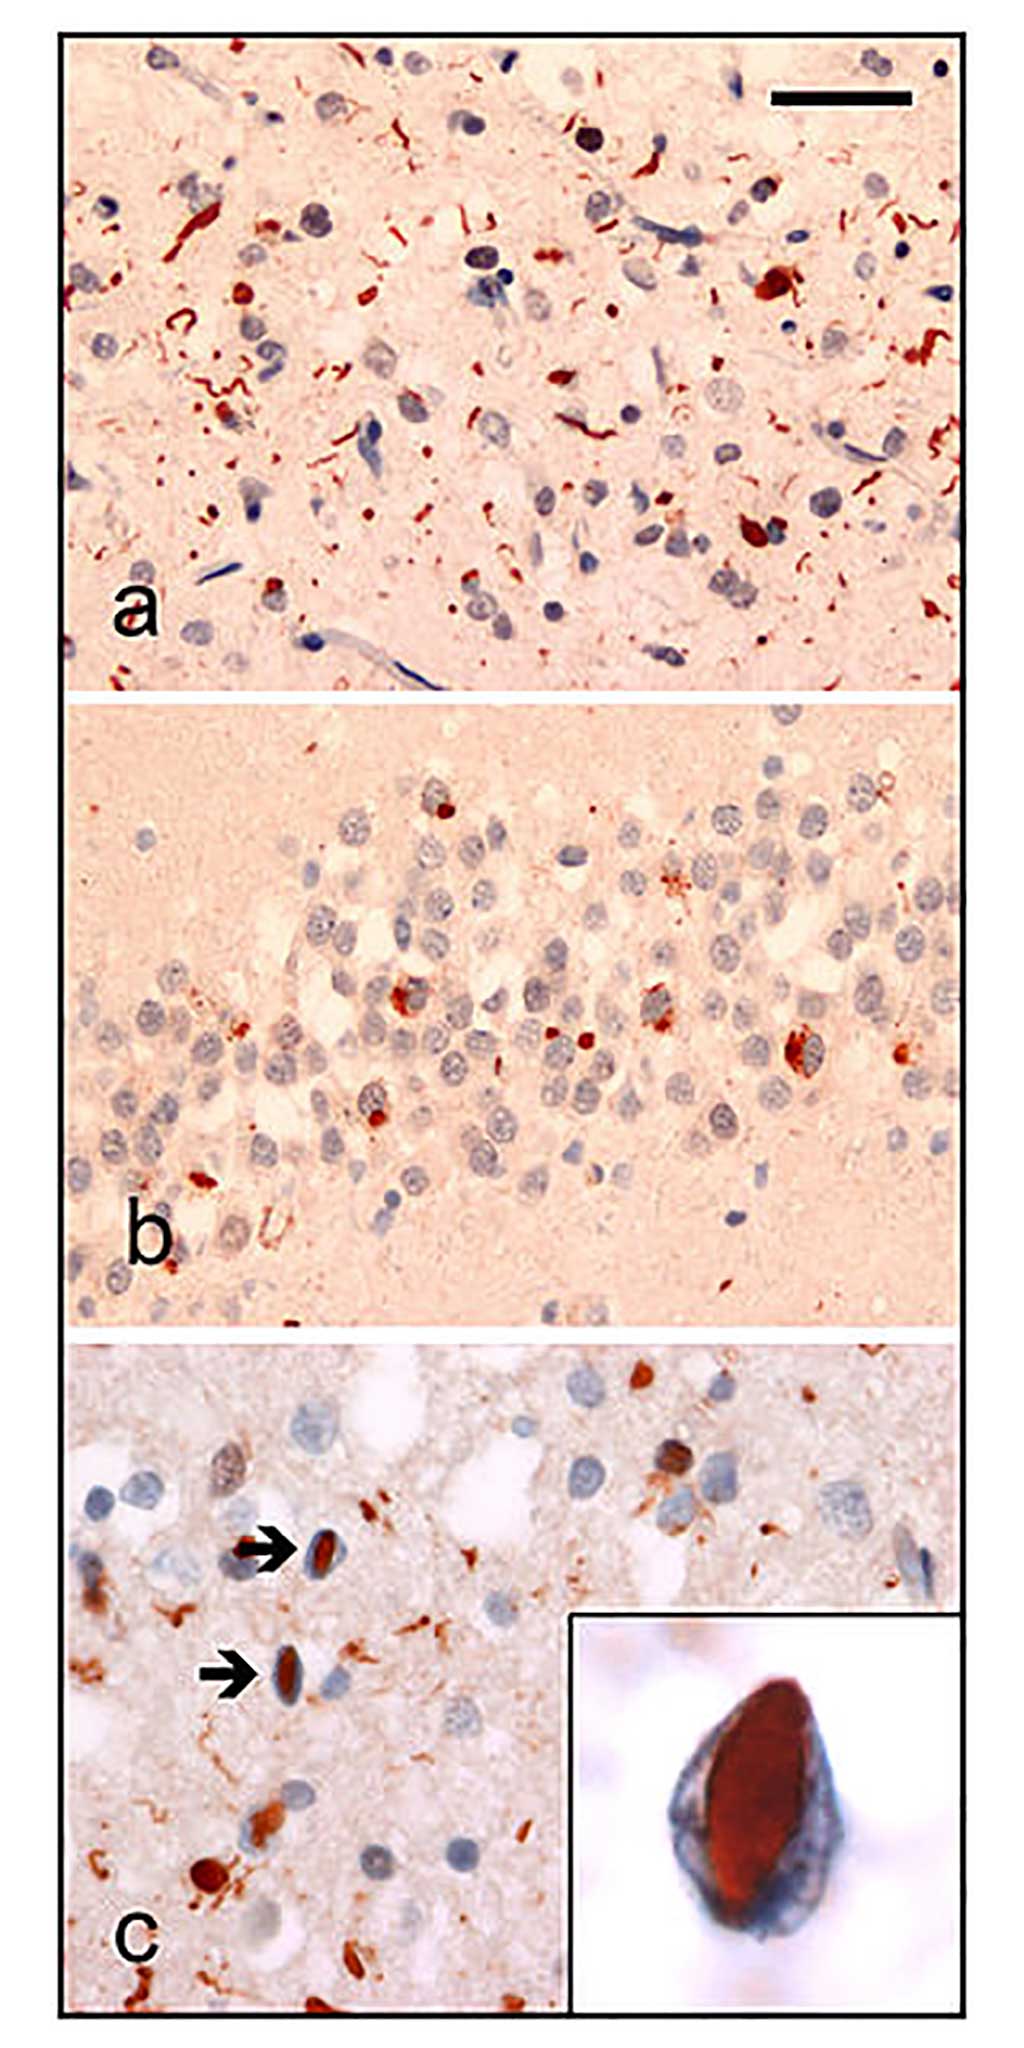 Image: Neuropathologic analysis of brain tissue from FTLD patients. Ubiquitin immunohistochemistry in cases of familial FTLD demonstrates staining of (a) neurites and neuronal cytoplasmic inclusions in the superficial cerebral neocortex, (b) neuronal cytoplasmic inclusions in hippocampal dentate granule cells, and (c) neuronal intranuclear inclusions in the cerebral neocortex (arrows) (Photo courtesy of Wikimedia Commons)